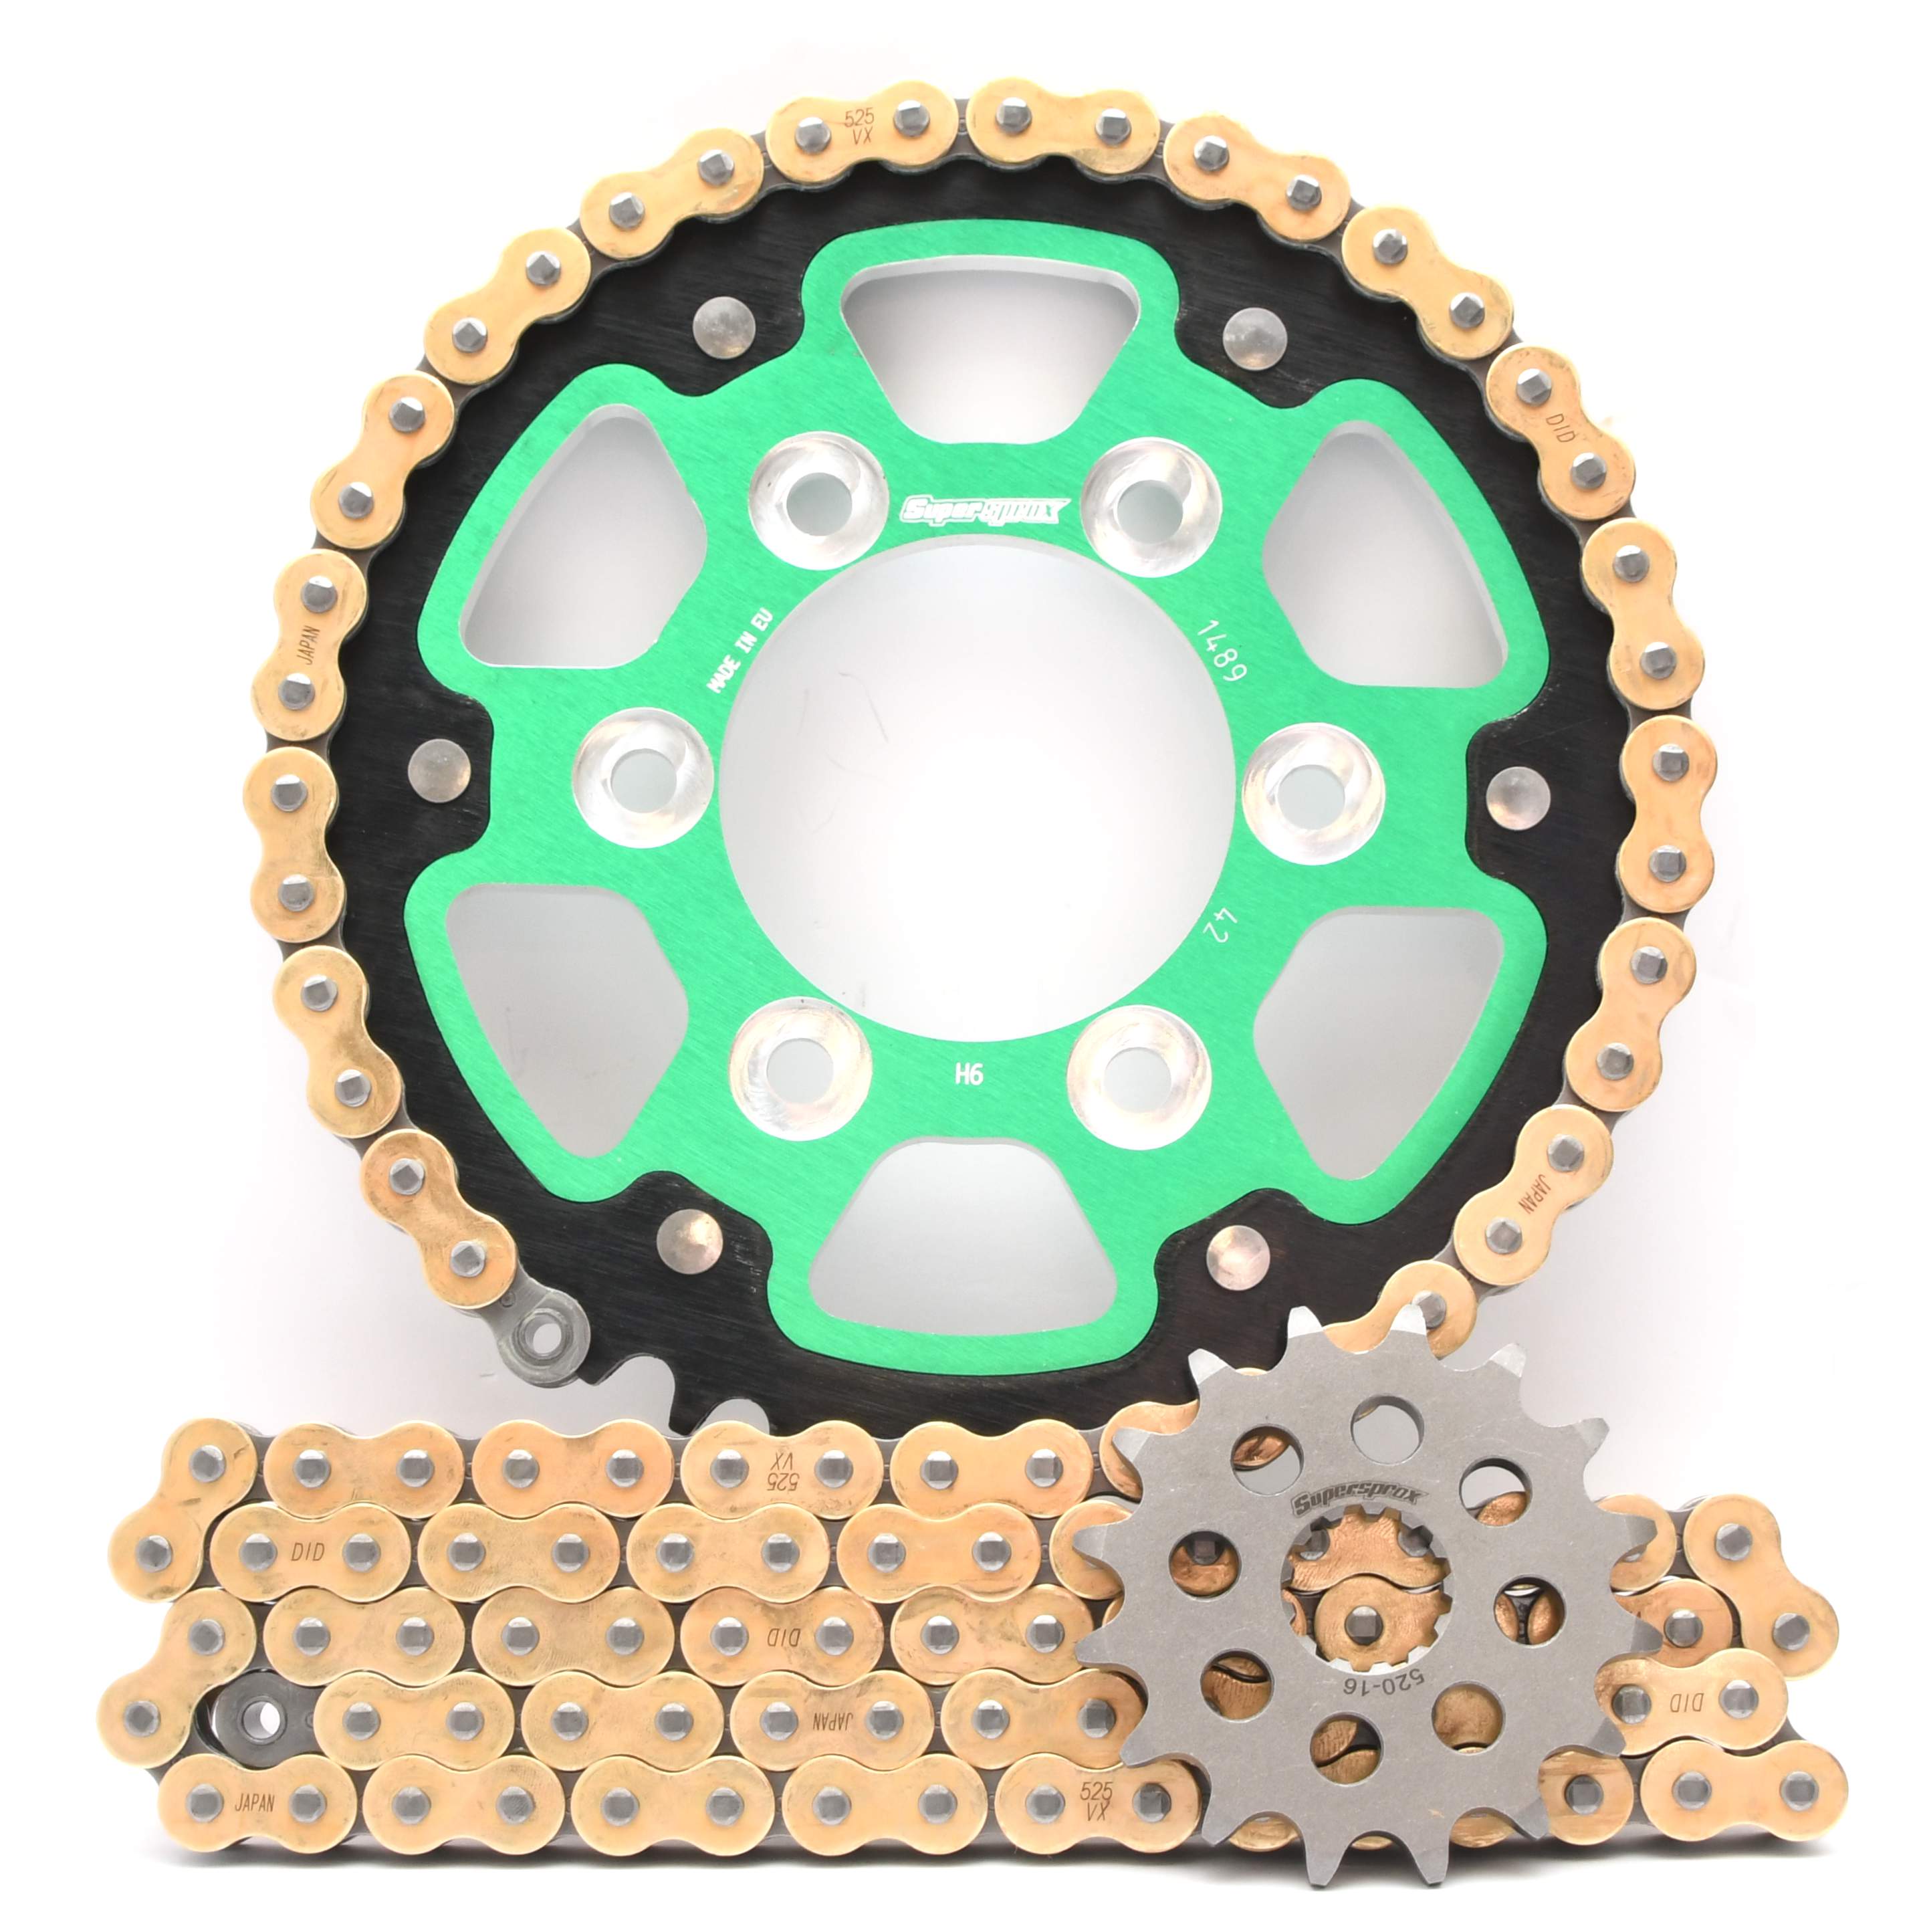 Supersprox Stealth Chain & Sprocket Kit for Kawasaki ZX6R 98-02 - Standard Gearing - 0